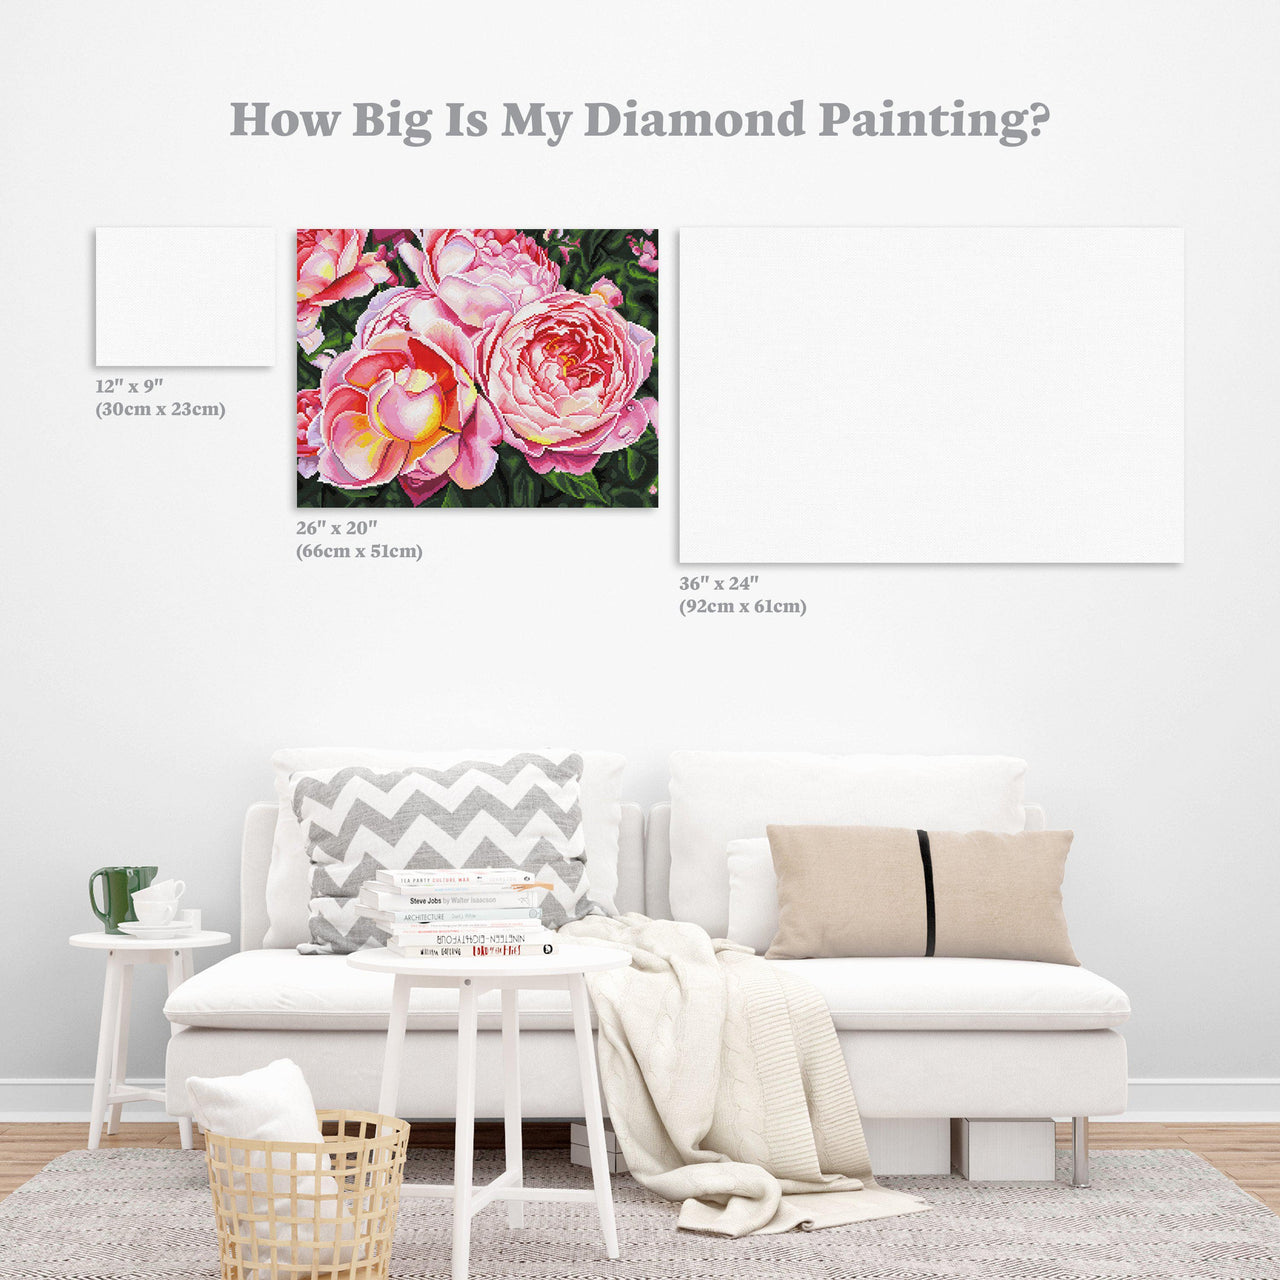 Diamond Painting Pink Roses 26" x 20" (66cm x 51cm) / Round with 42 Colors including 6 ABs / 42,535